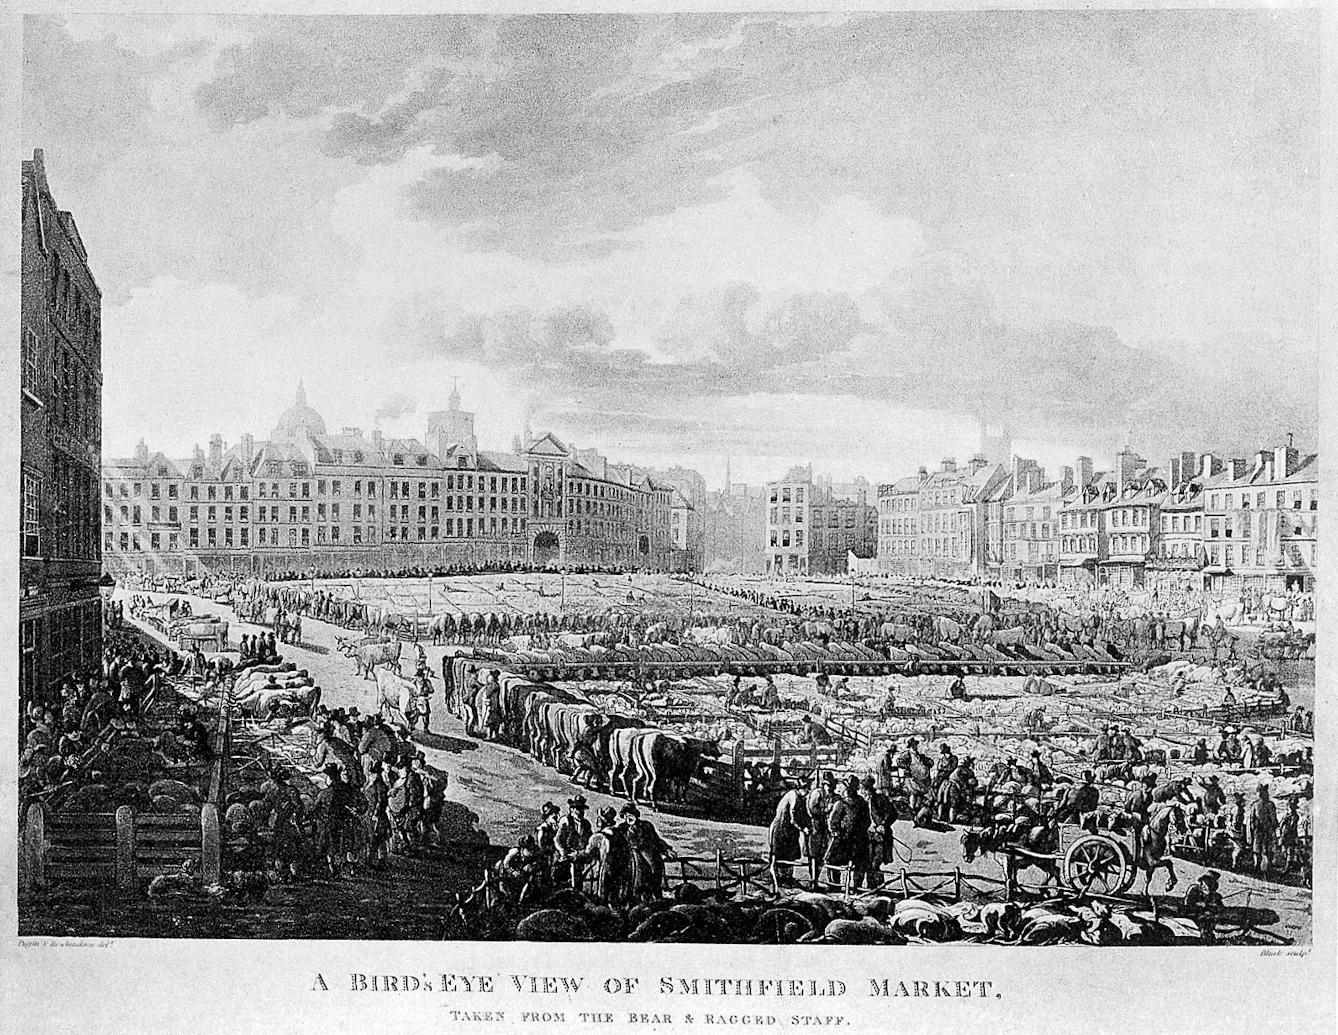 Black and white illustration offering a wide perspective of a cattle market - full of cows and people - surrounded by tall buildings.